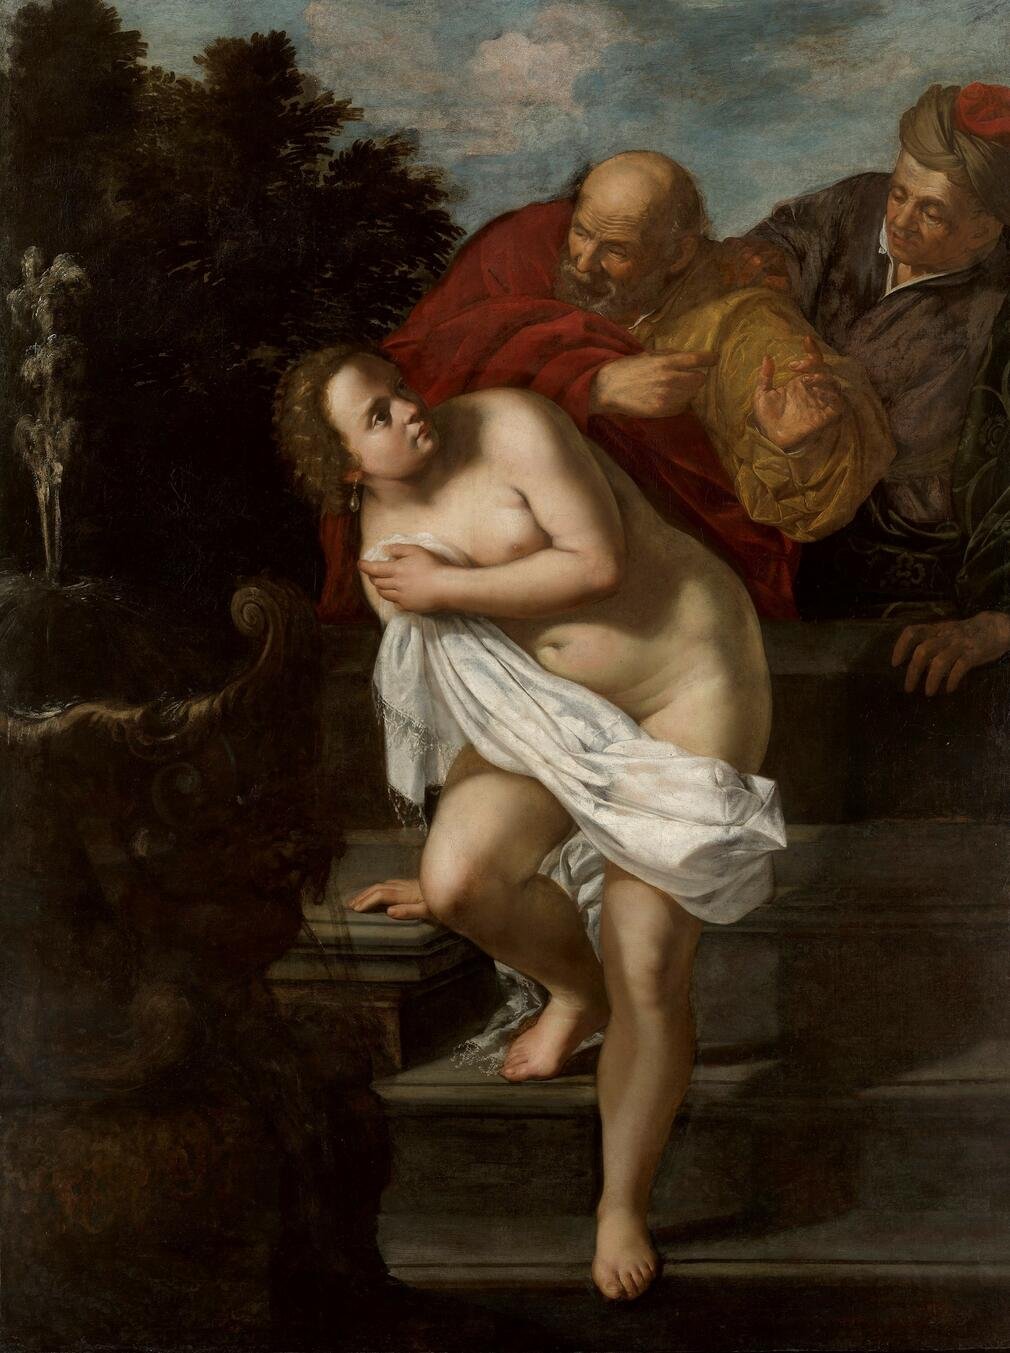 Image of Susanna and the Elders after conservation 